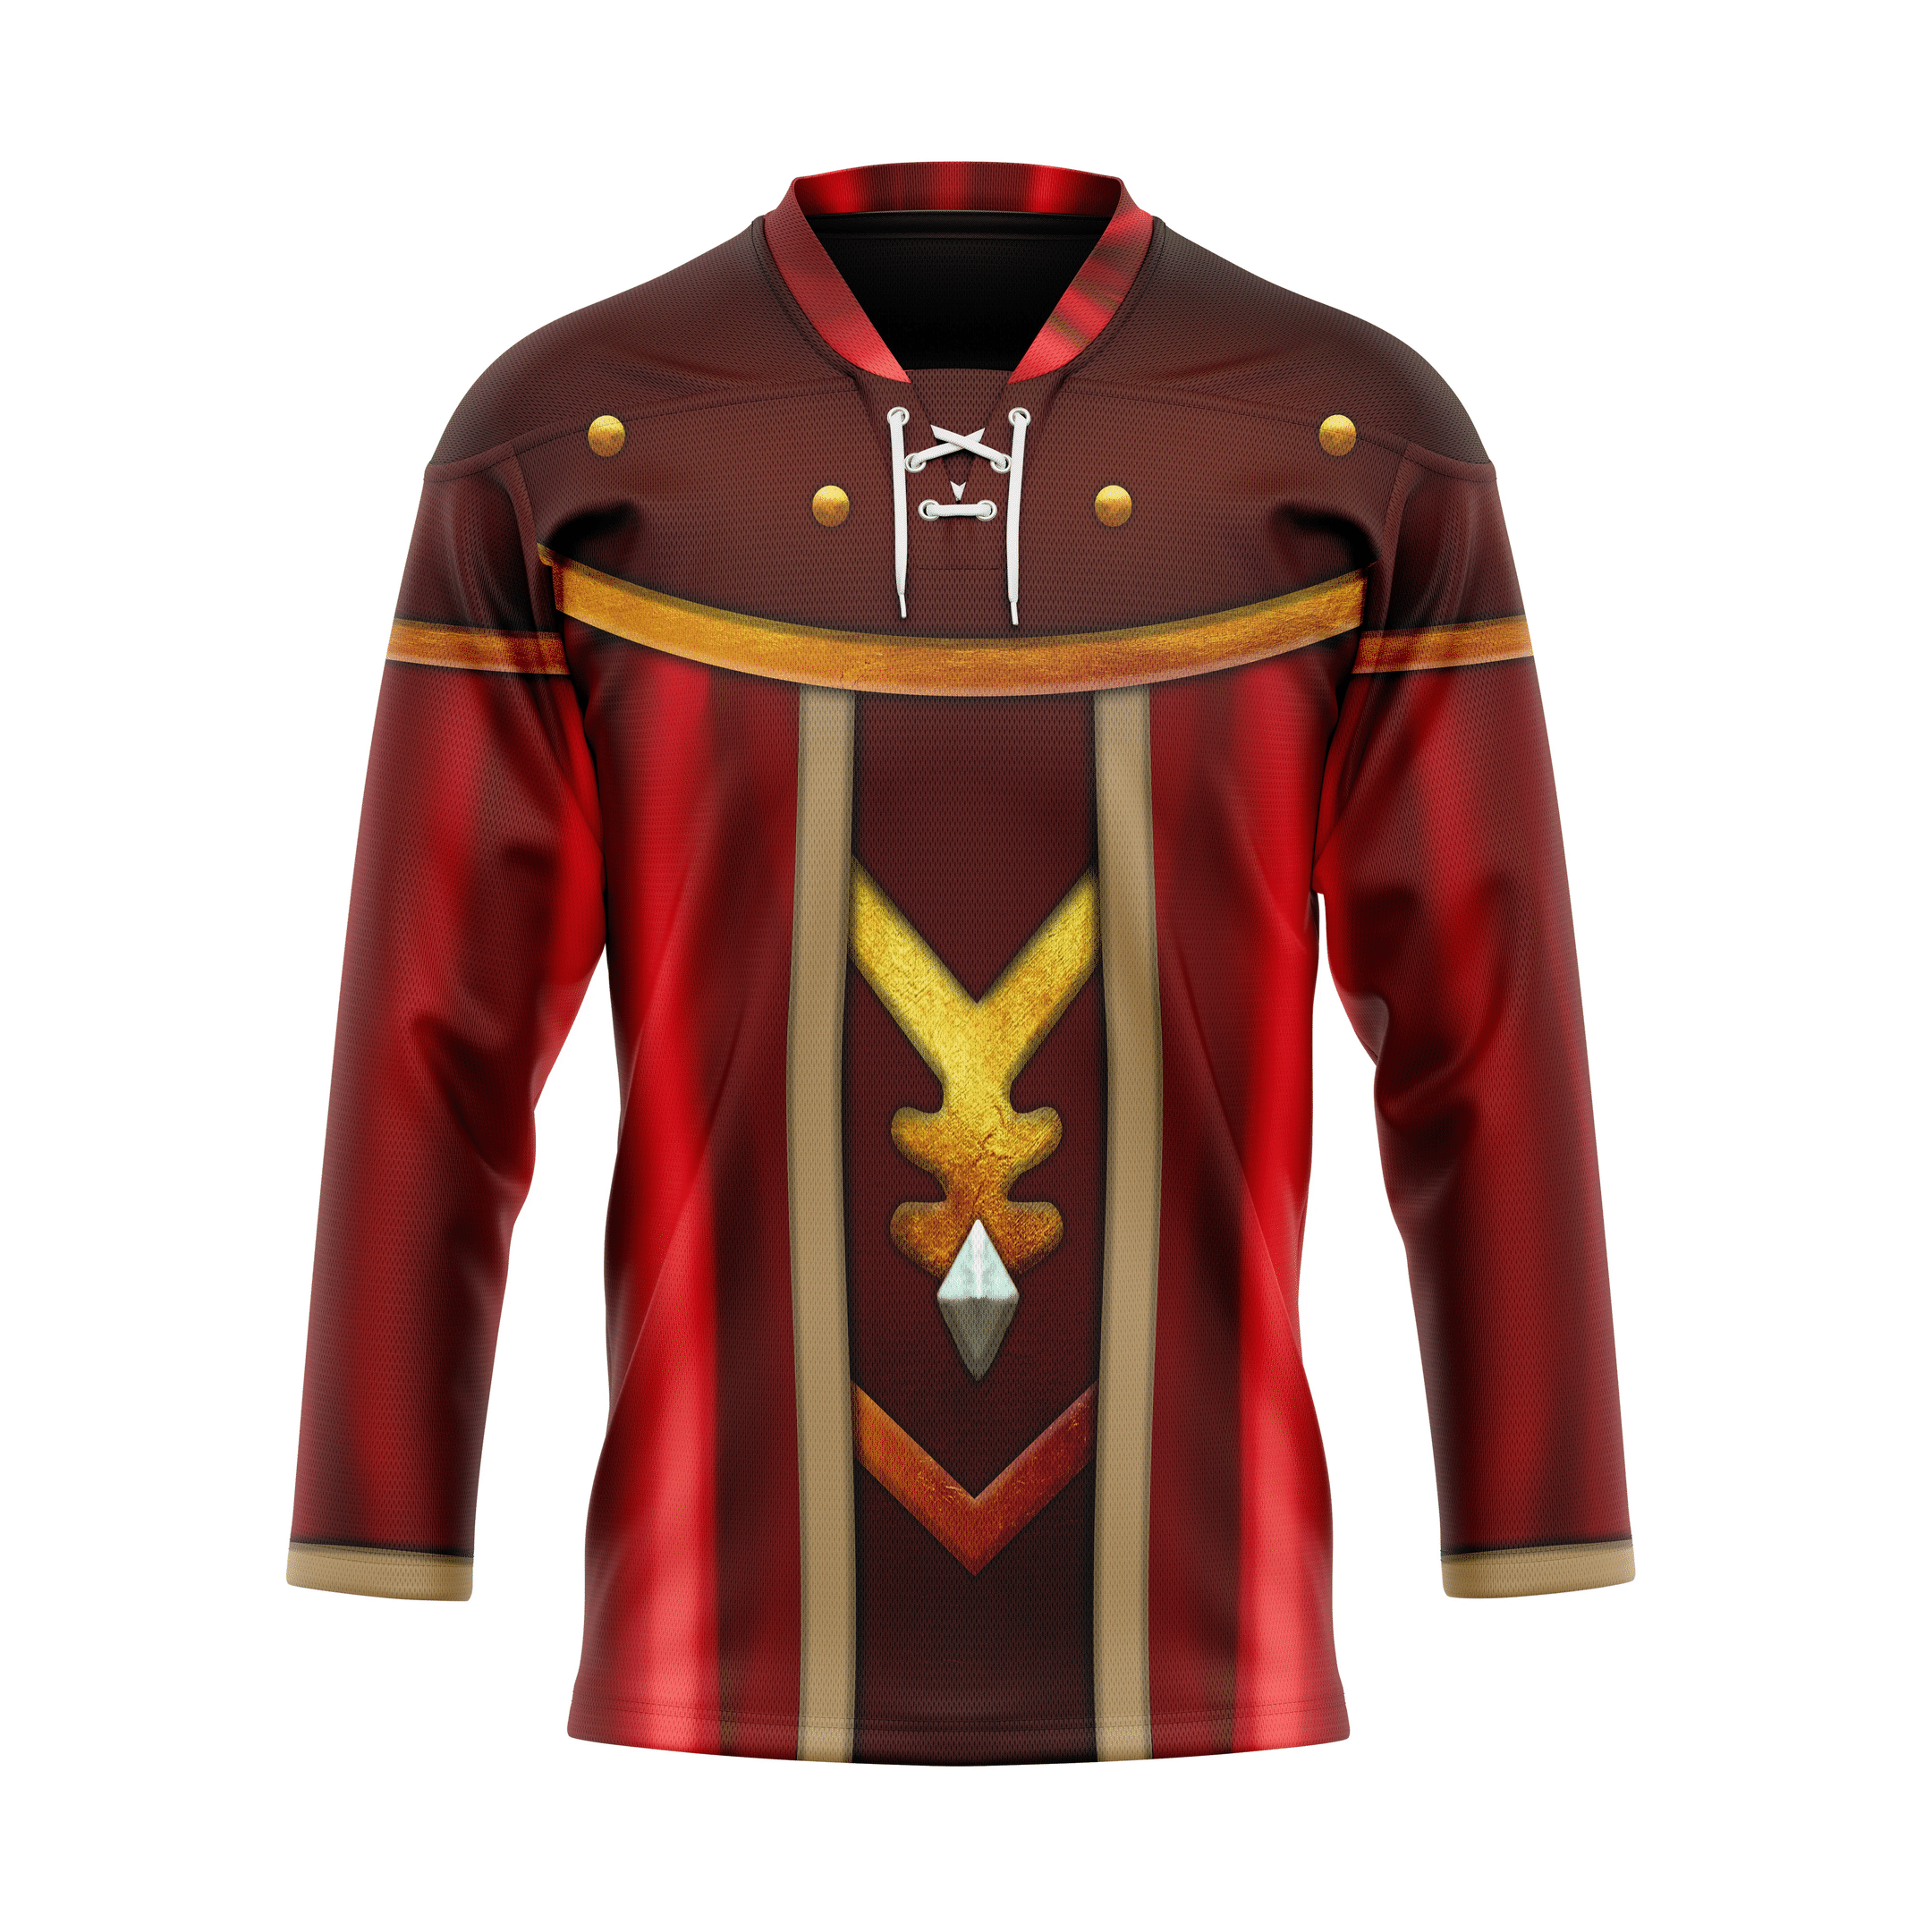 Check out our collection of unique and stylish hockey jerseys from all over the world 174